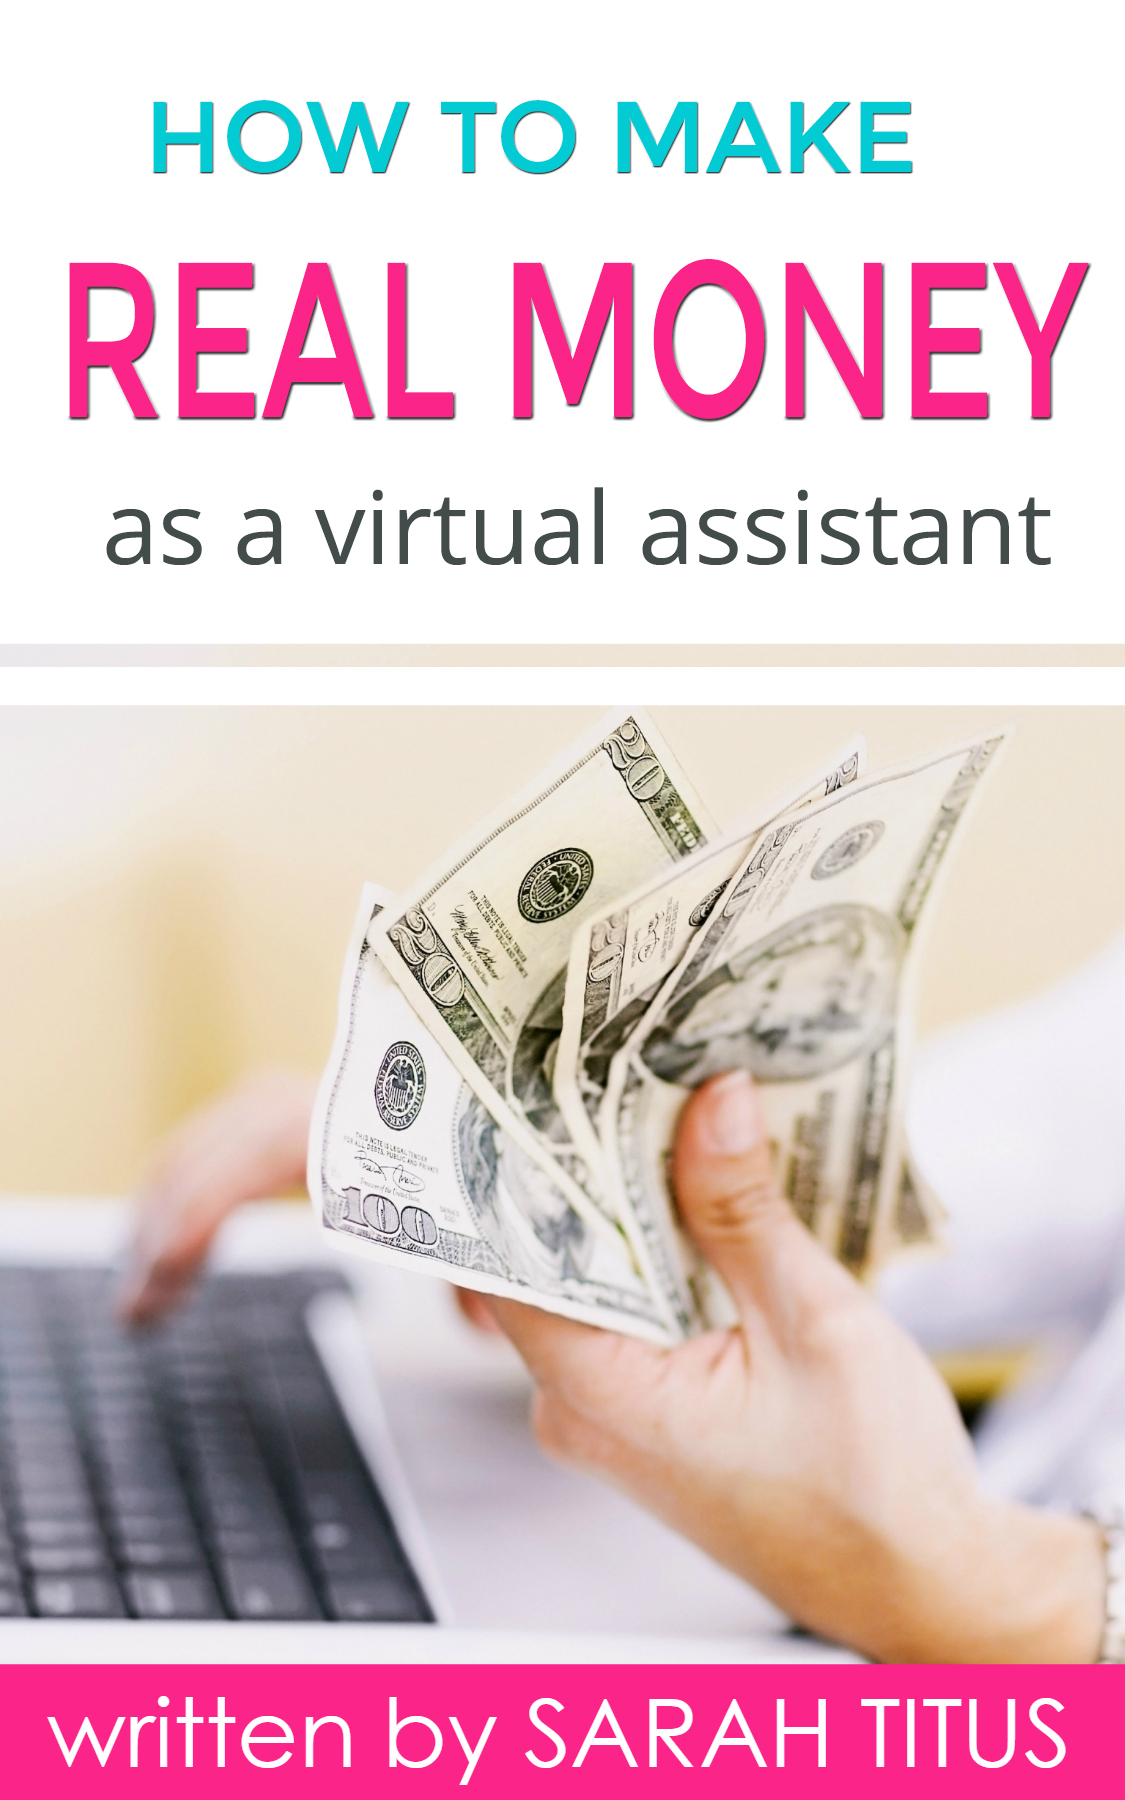 I've been making money from home for 18 years. Let me show you how you could be making real money as a VA from home! It's not as hard as you think! #virtualassistant